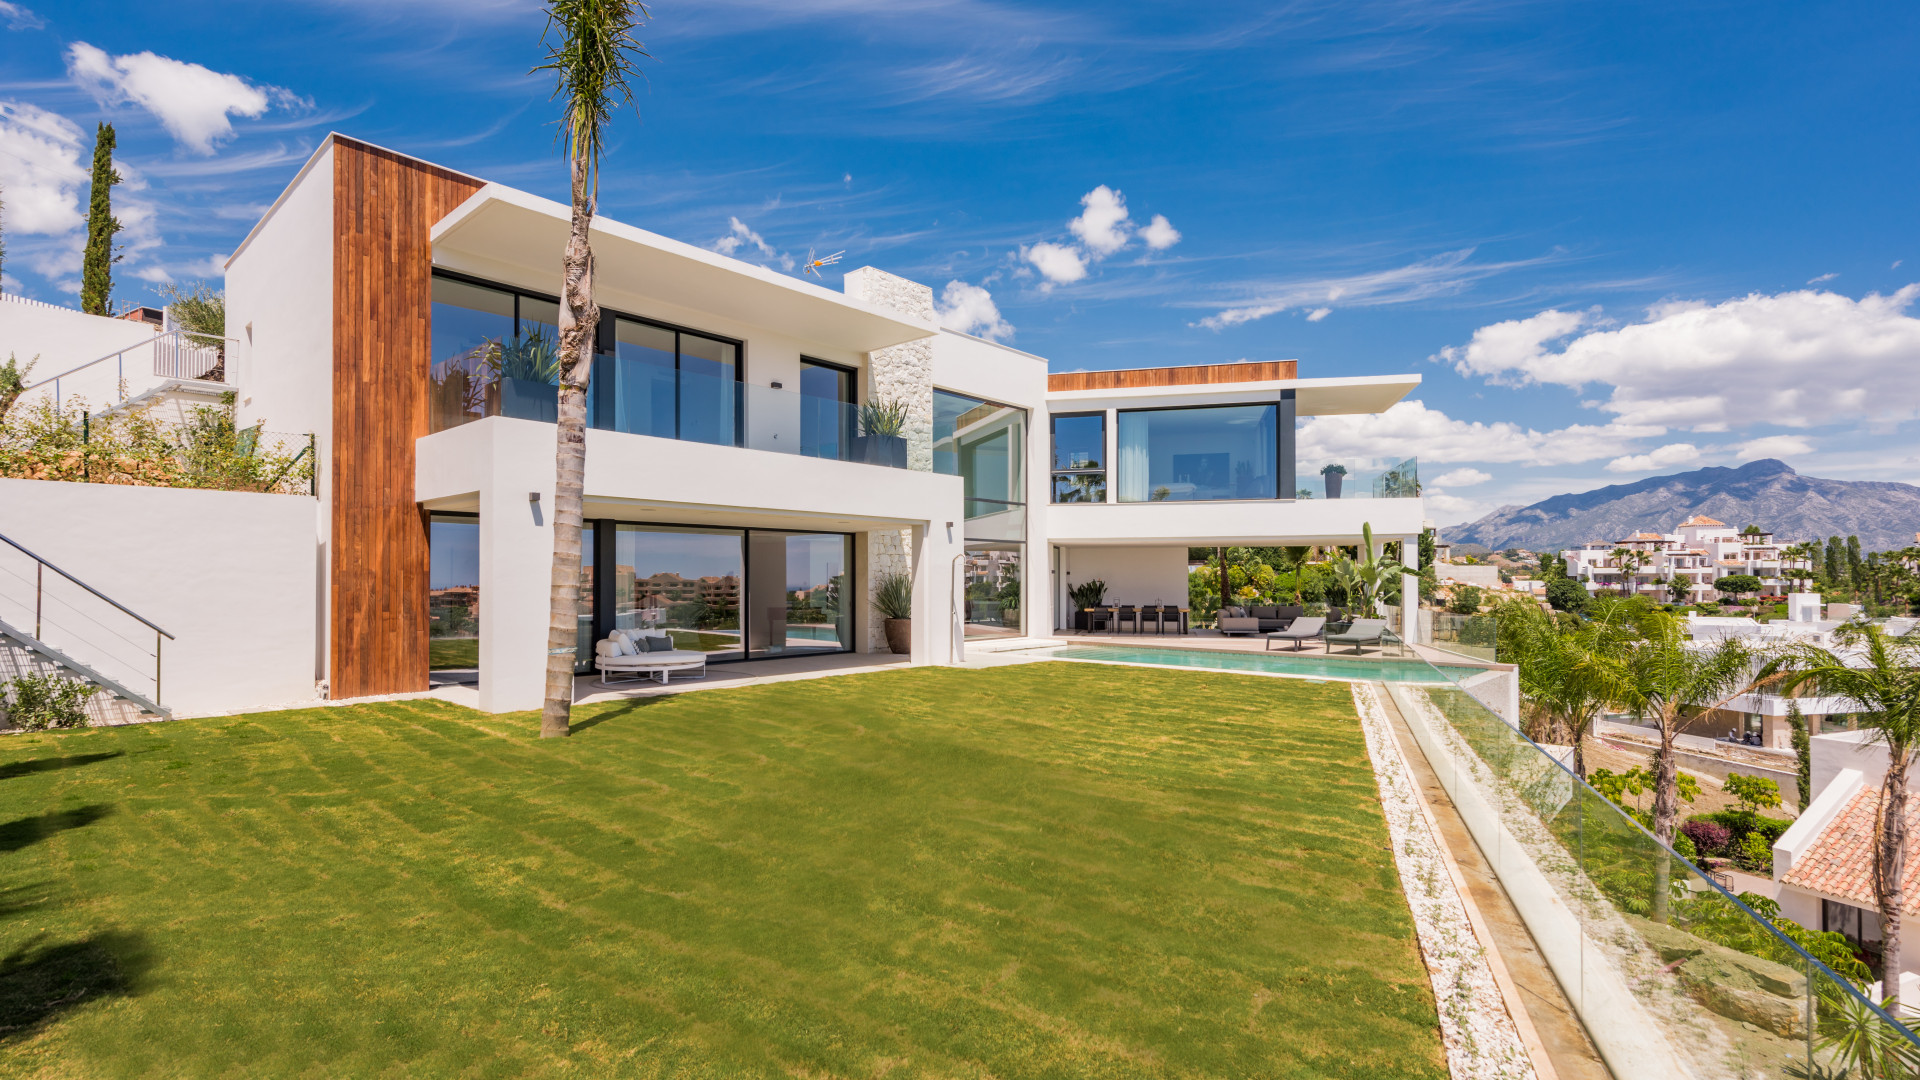 A SPECTACULAR 6 BEDROOM CONTEMPORARY VILLA WITH AMAZING VIEWS OF THE GOLF AND...